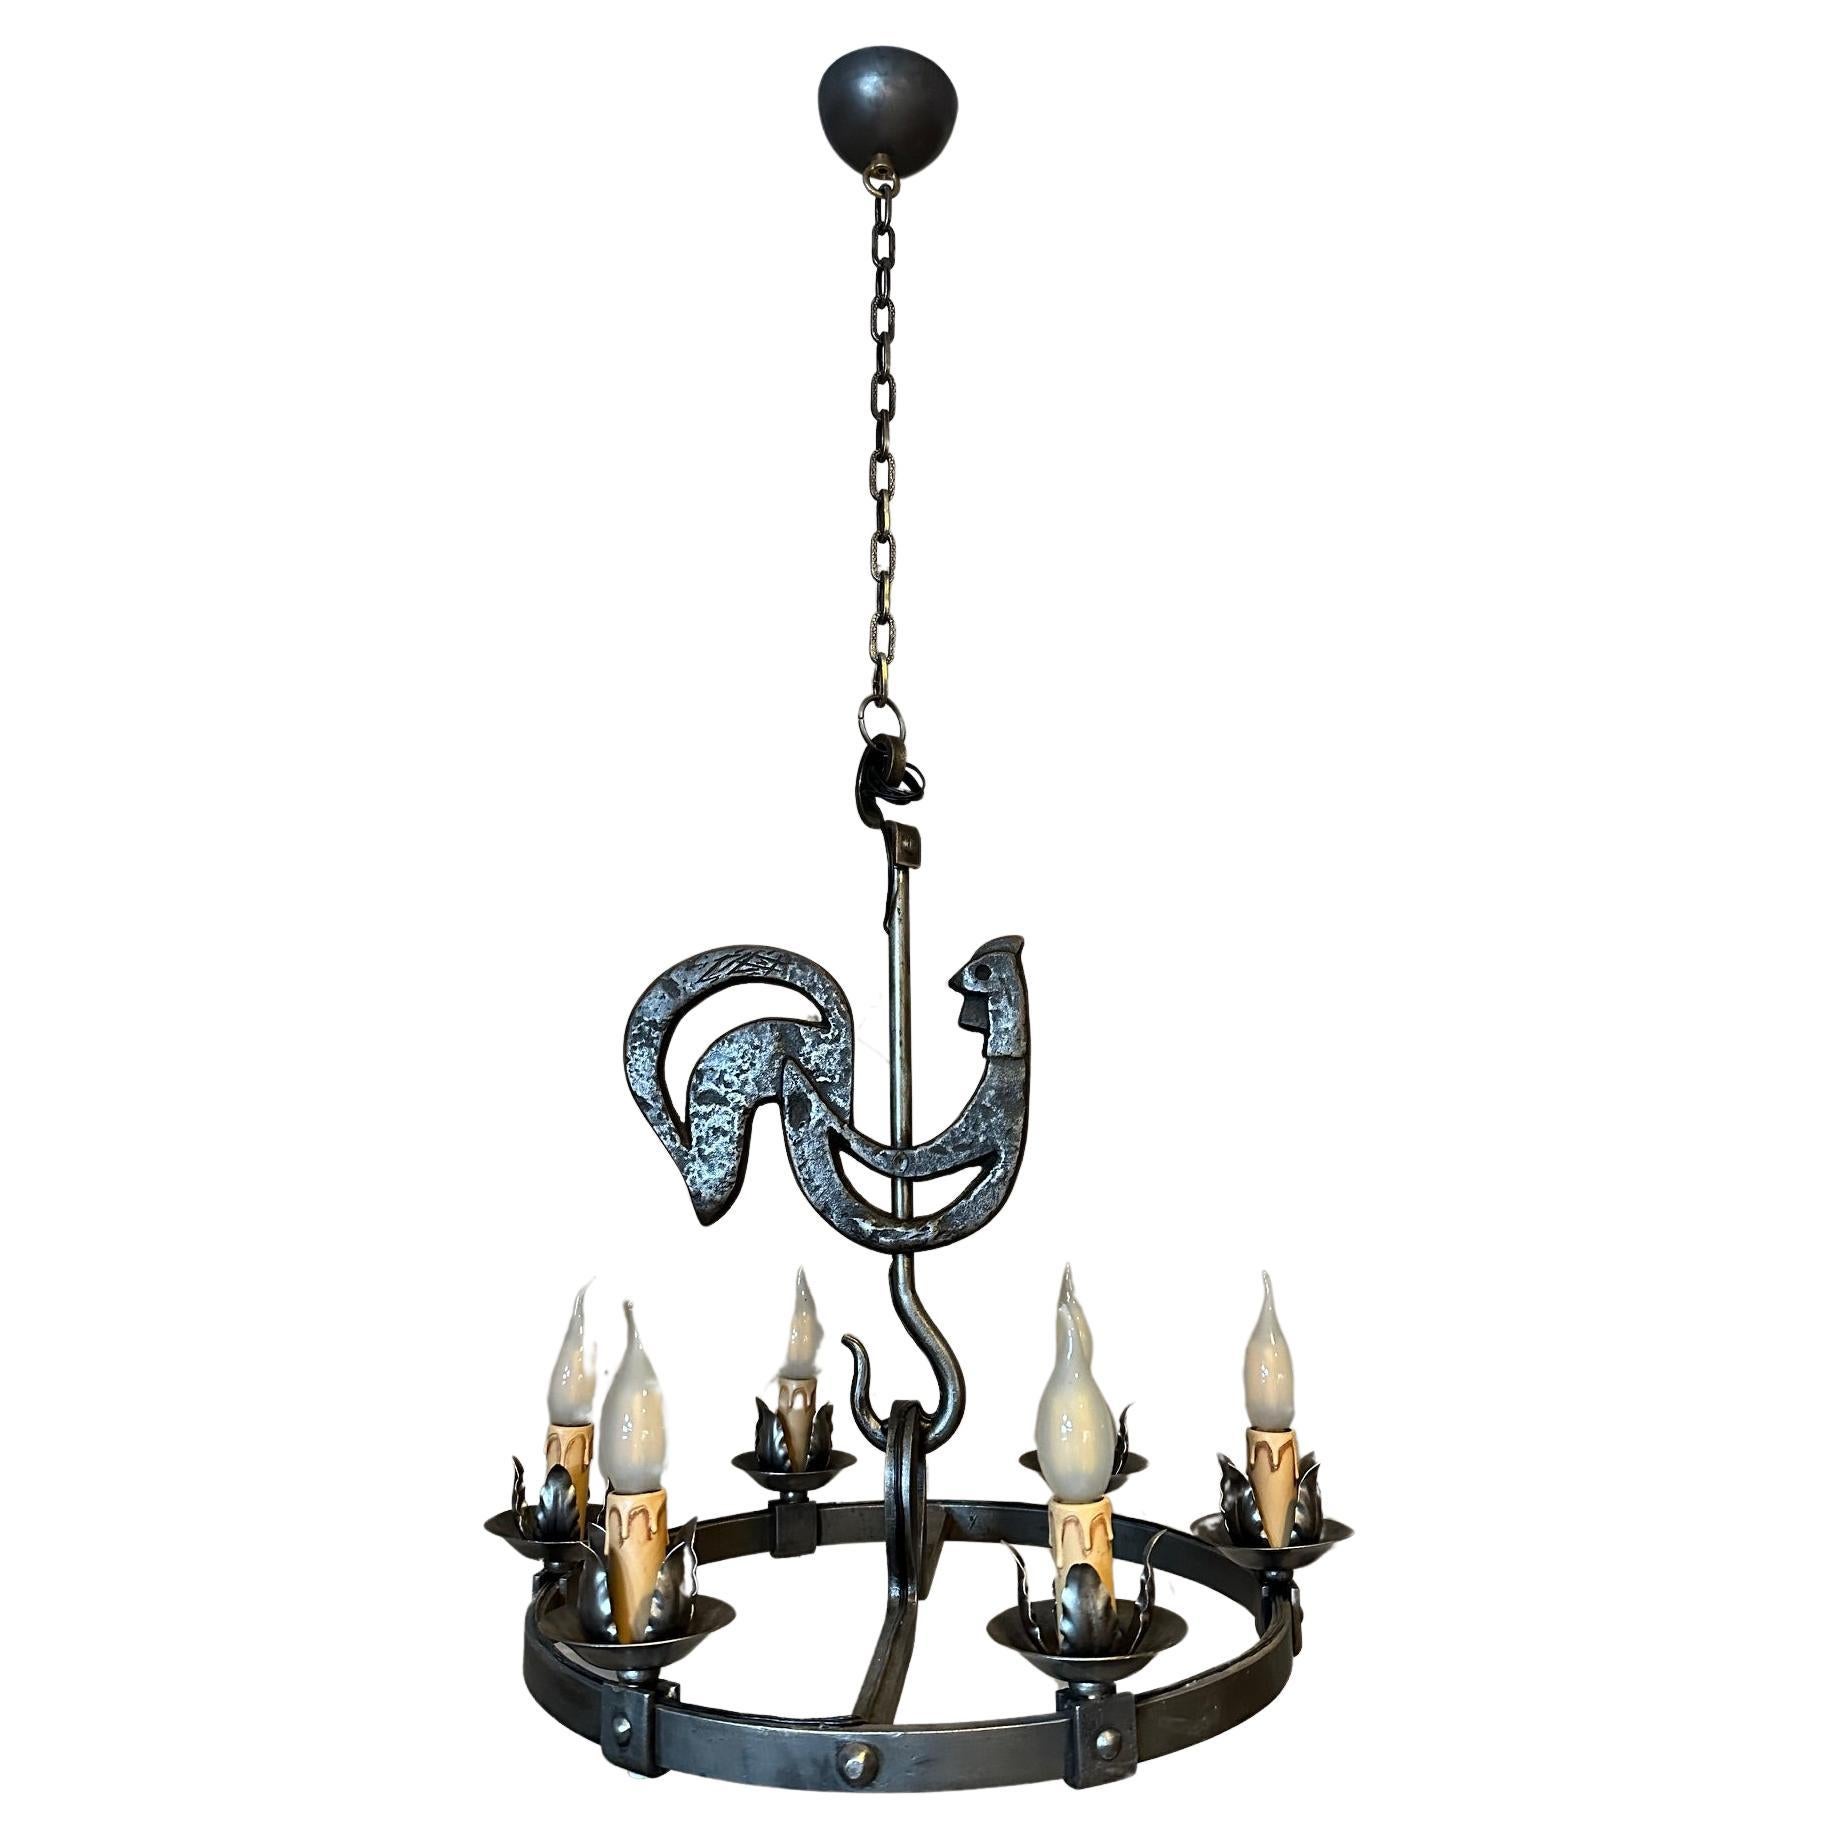 20th century French Jean Touret Wrought Iron Chandelier, 1950s